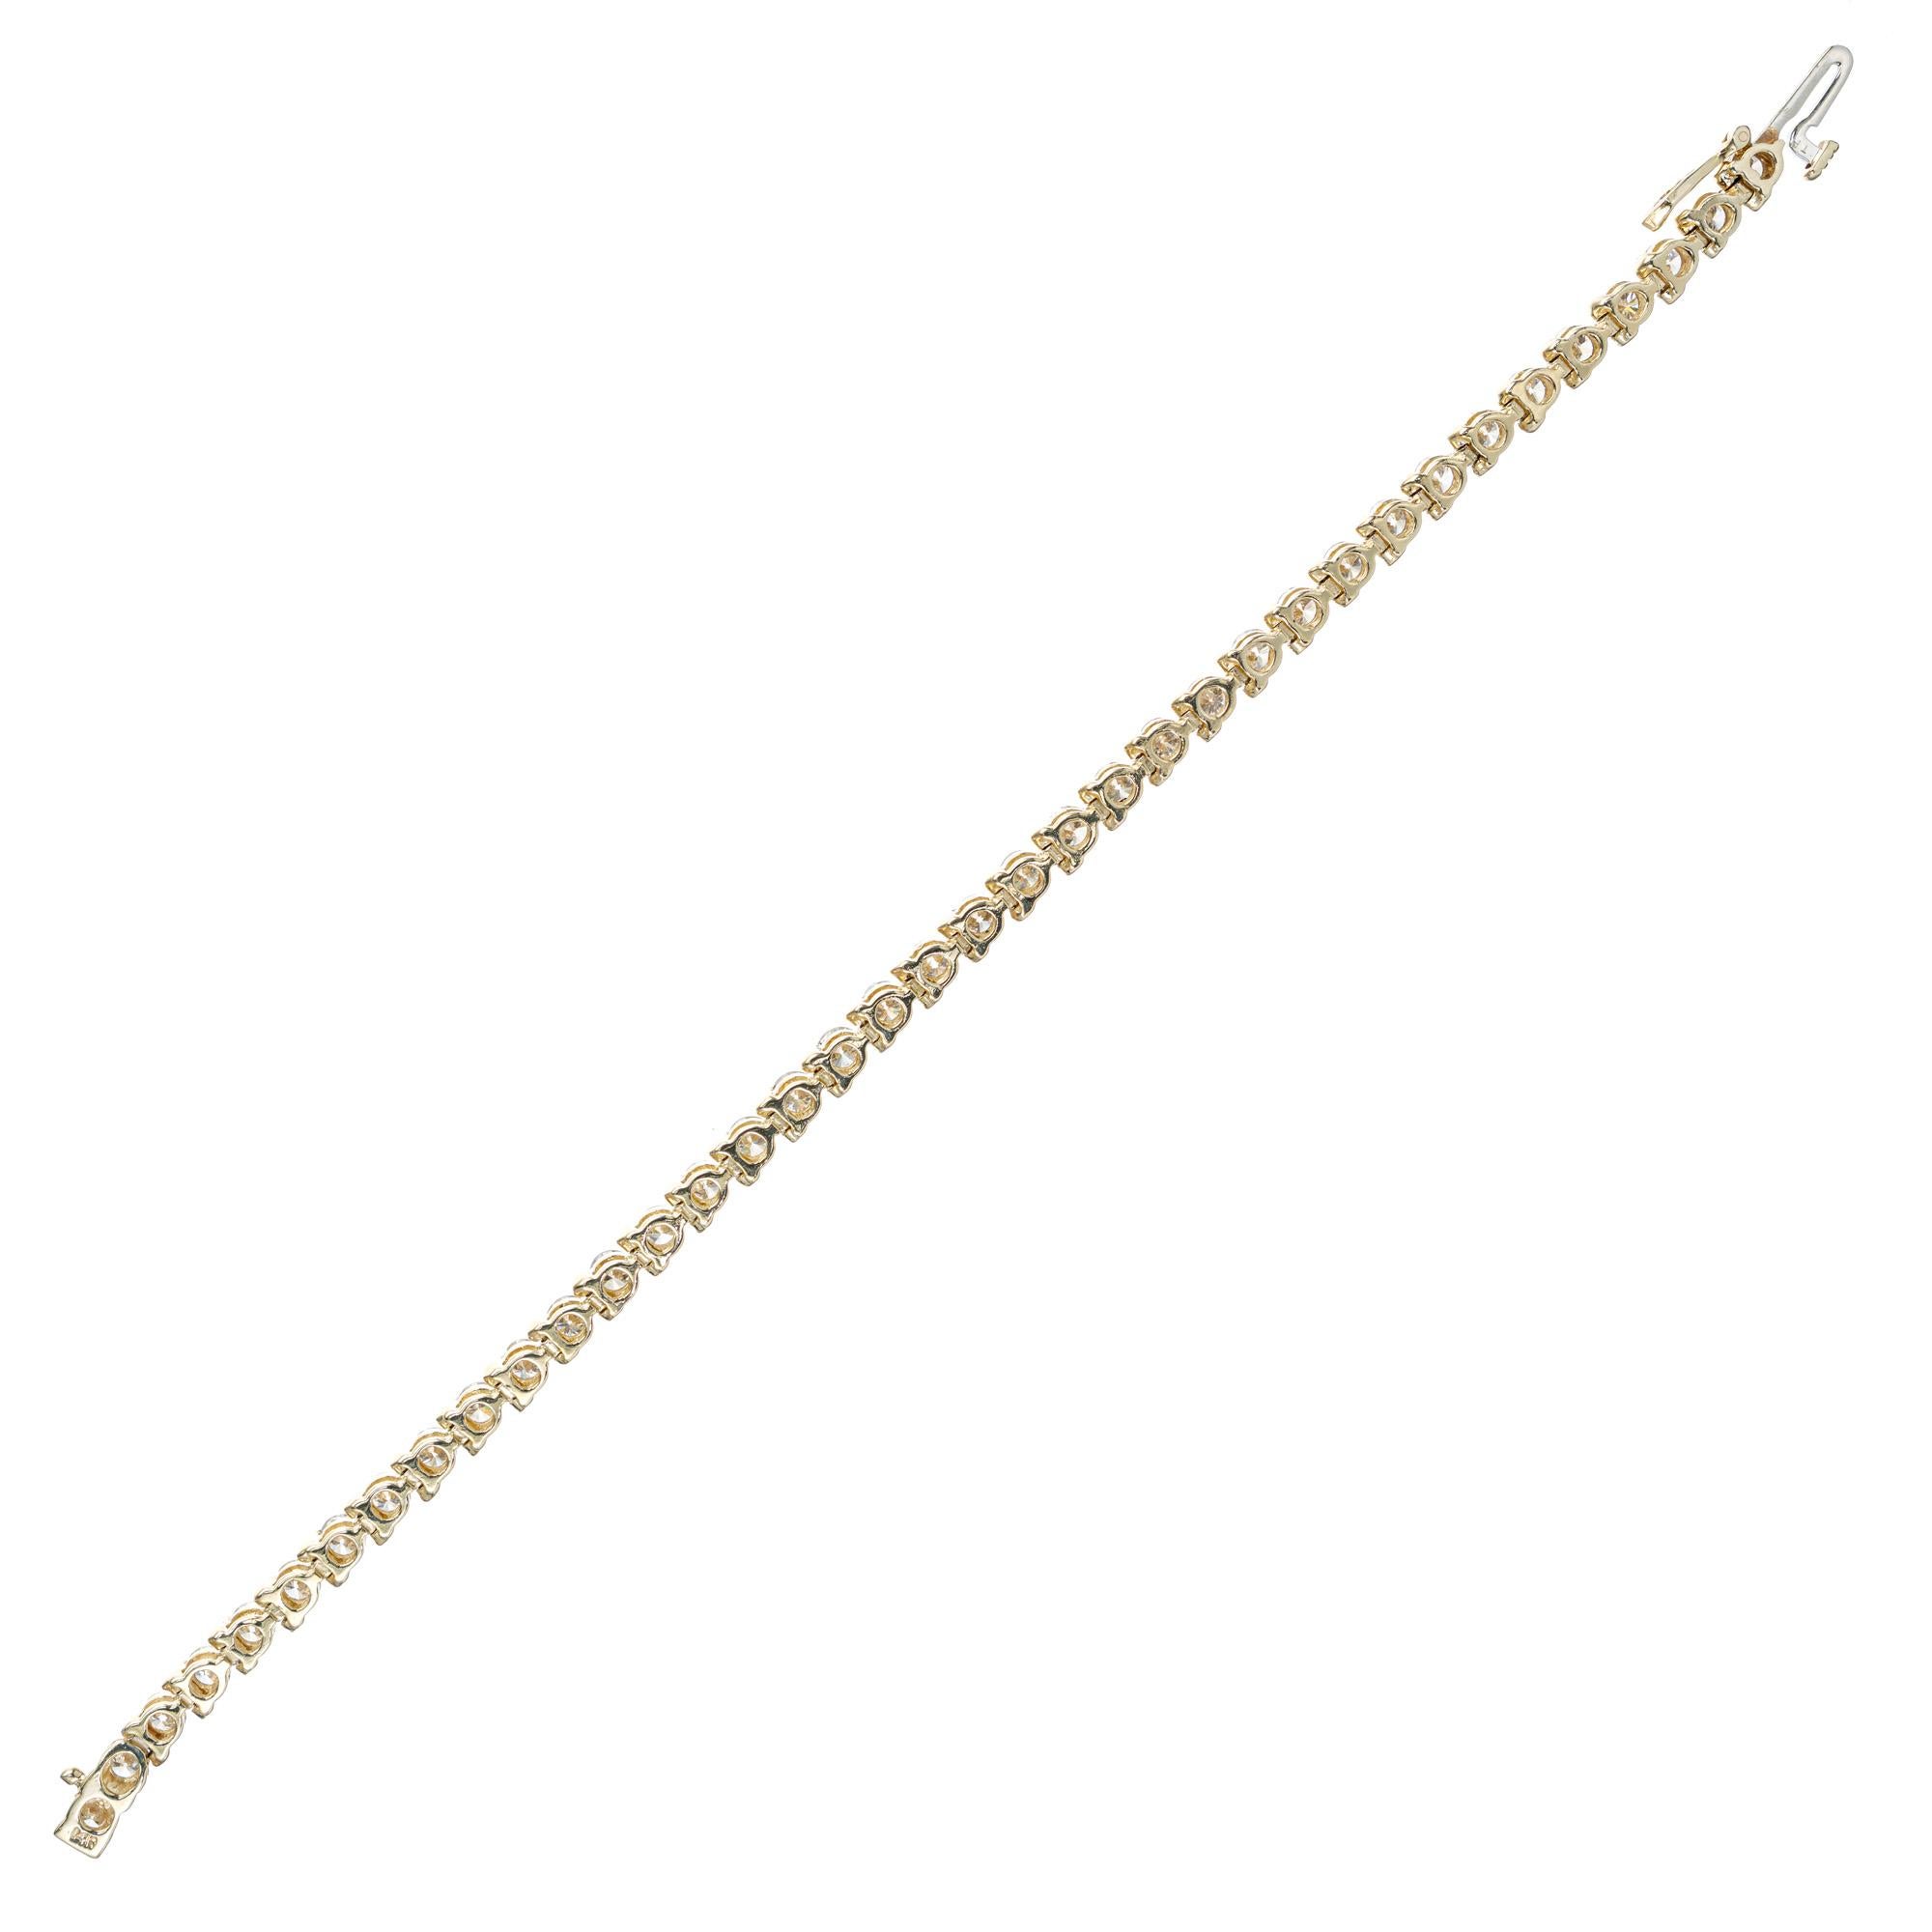 4.50 Carat Round Diamond Yellow Gold Tennis Bracelet In Good Condition For Sale In Stamford, CT